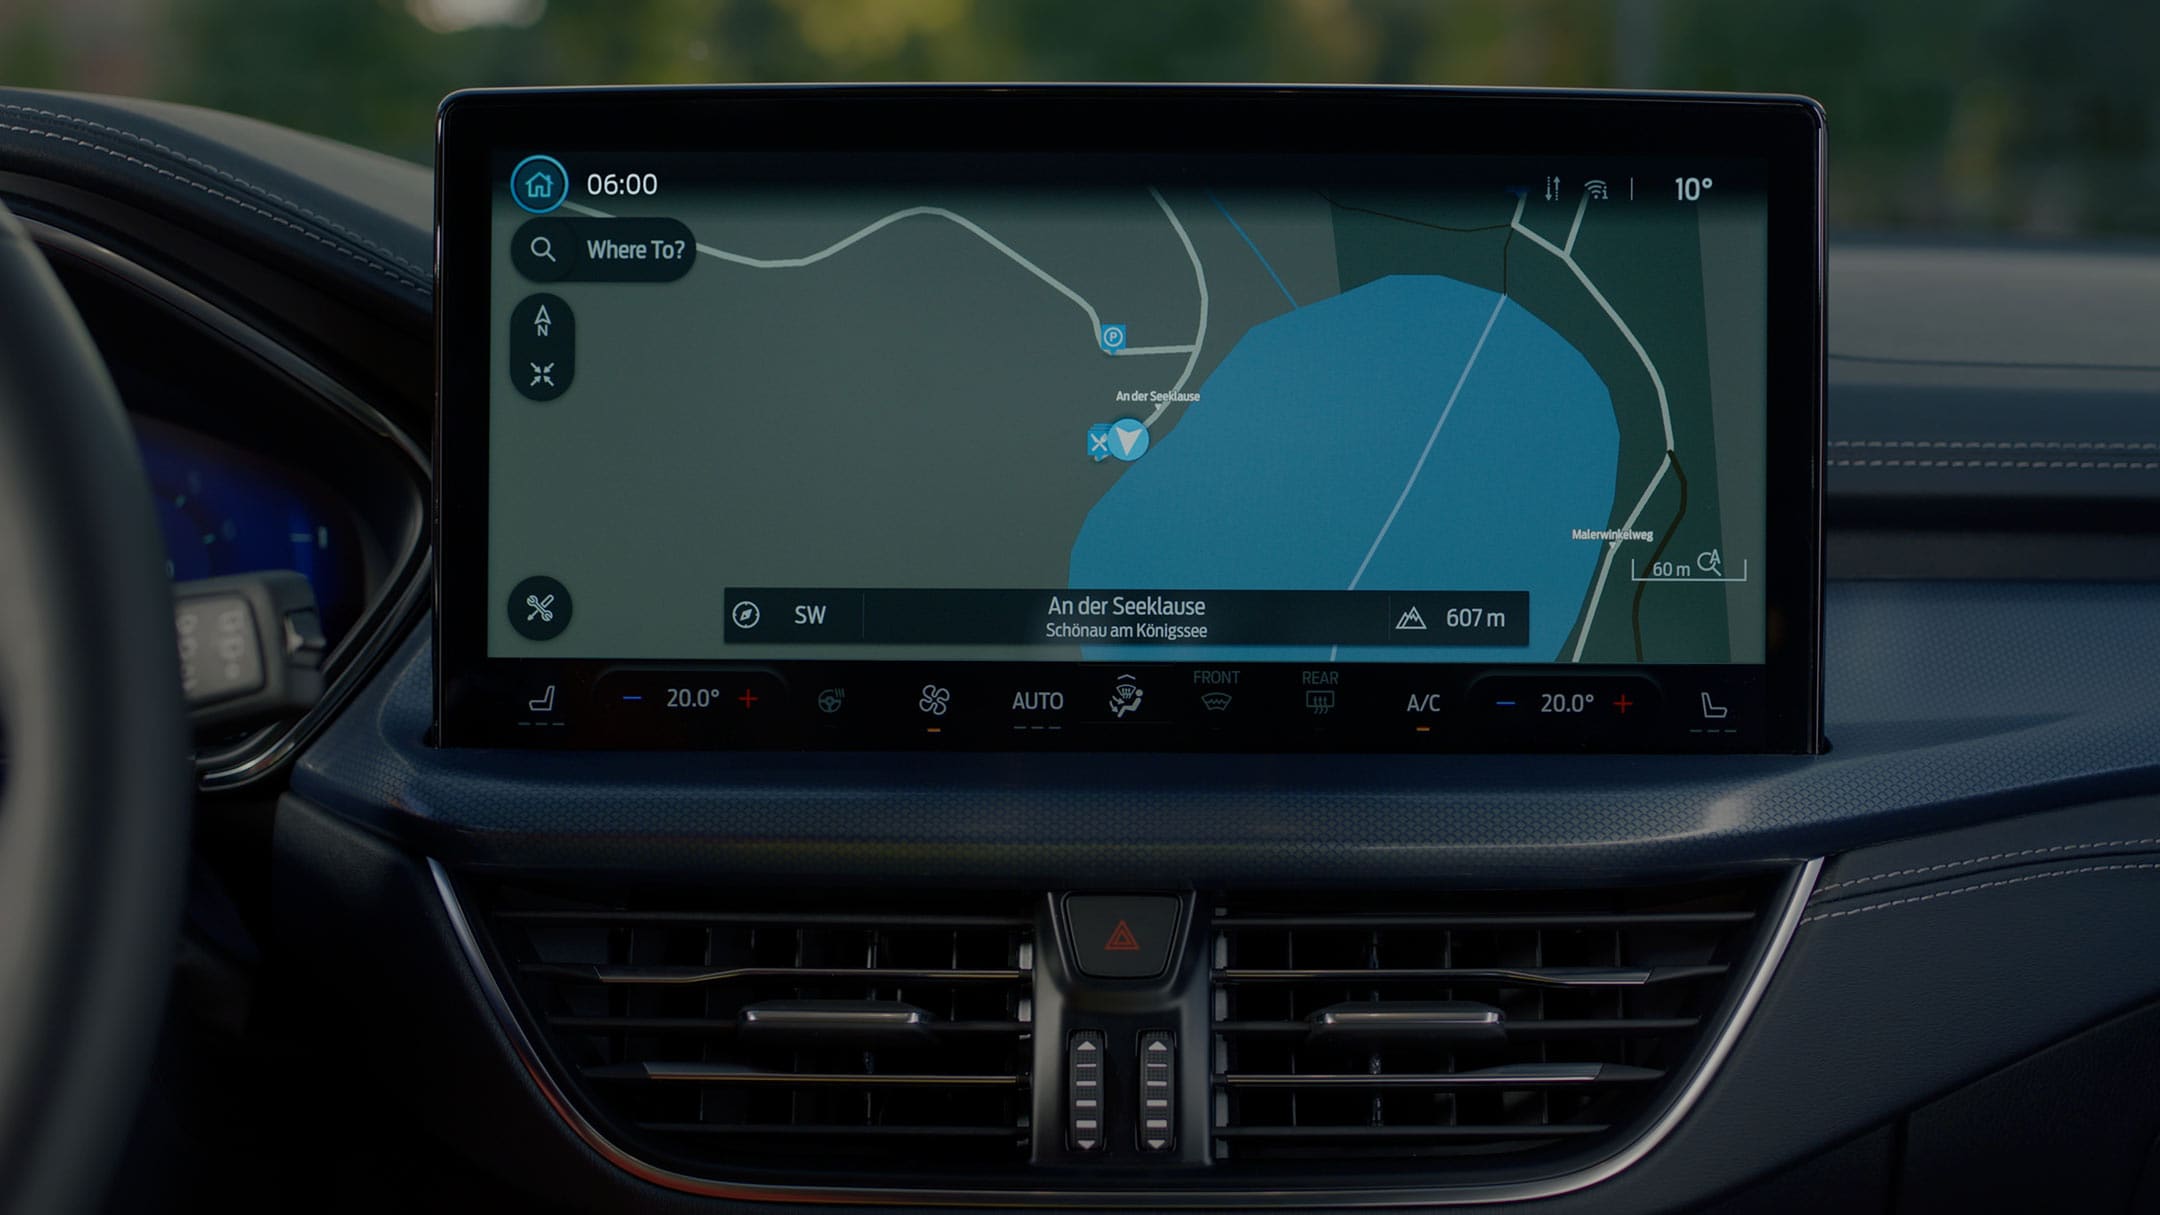 Ford Focus: Connected Navigation.